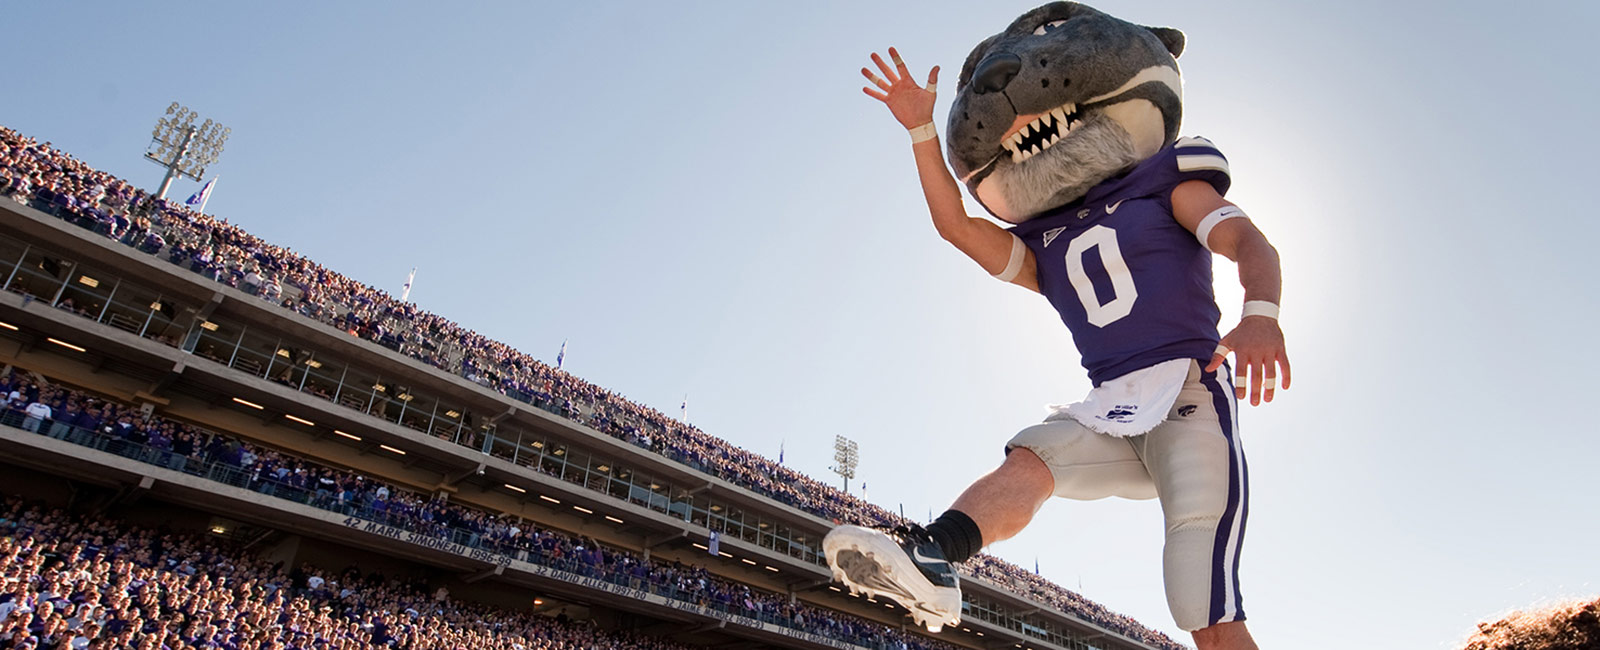 K-State's mascot, Willie the Wildcat, entertains the crowd at Bill Snyder Family Stadium during a football game.